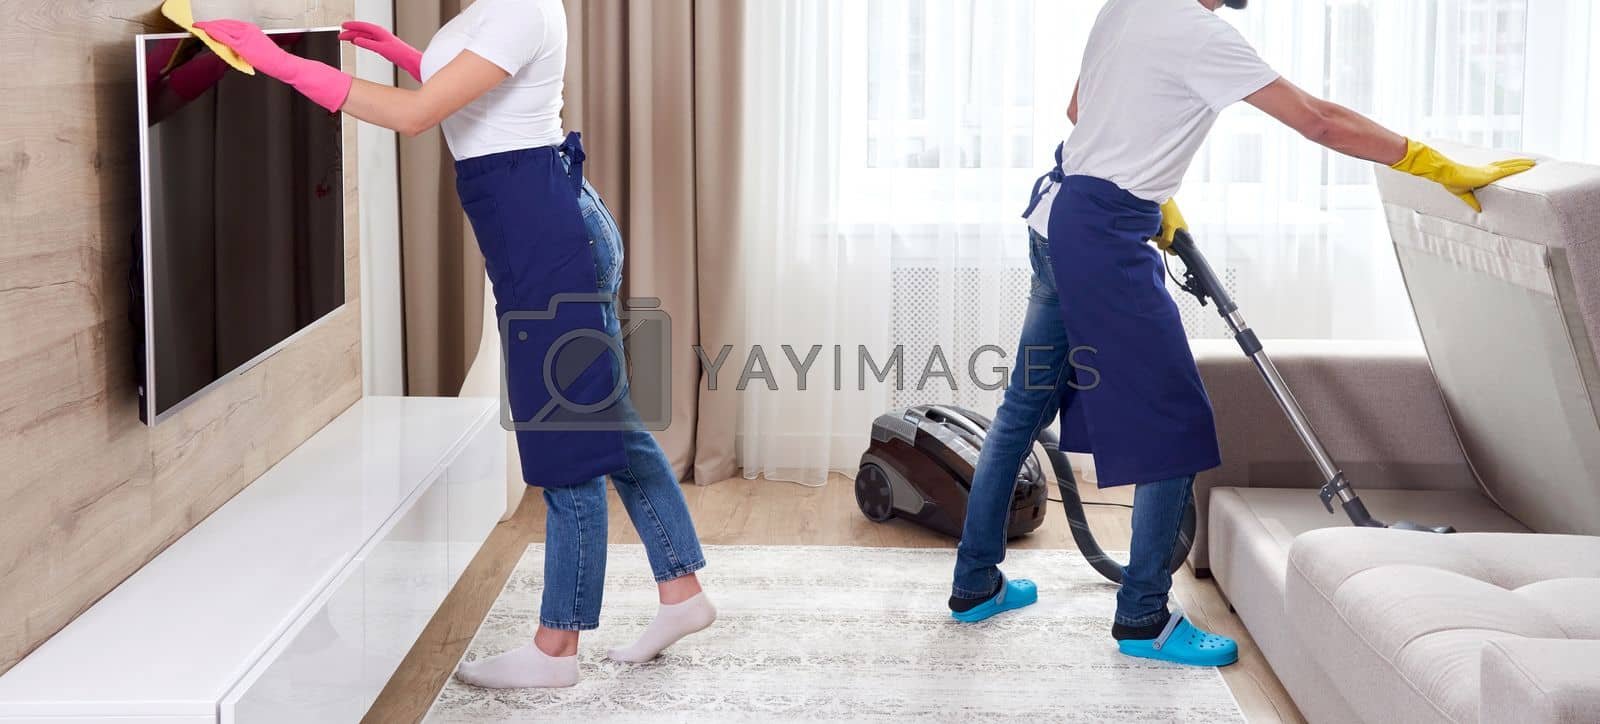 Royalty free image of Professional cleaners in blue uniform washing floor and wiping dust from the furniture in the living room of the apartment. Cleaning service concept by Mariakray